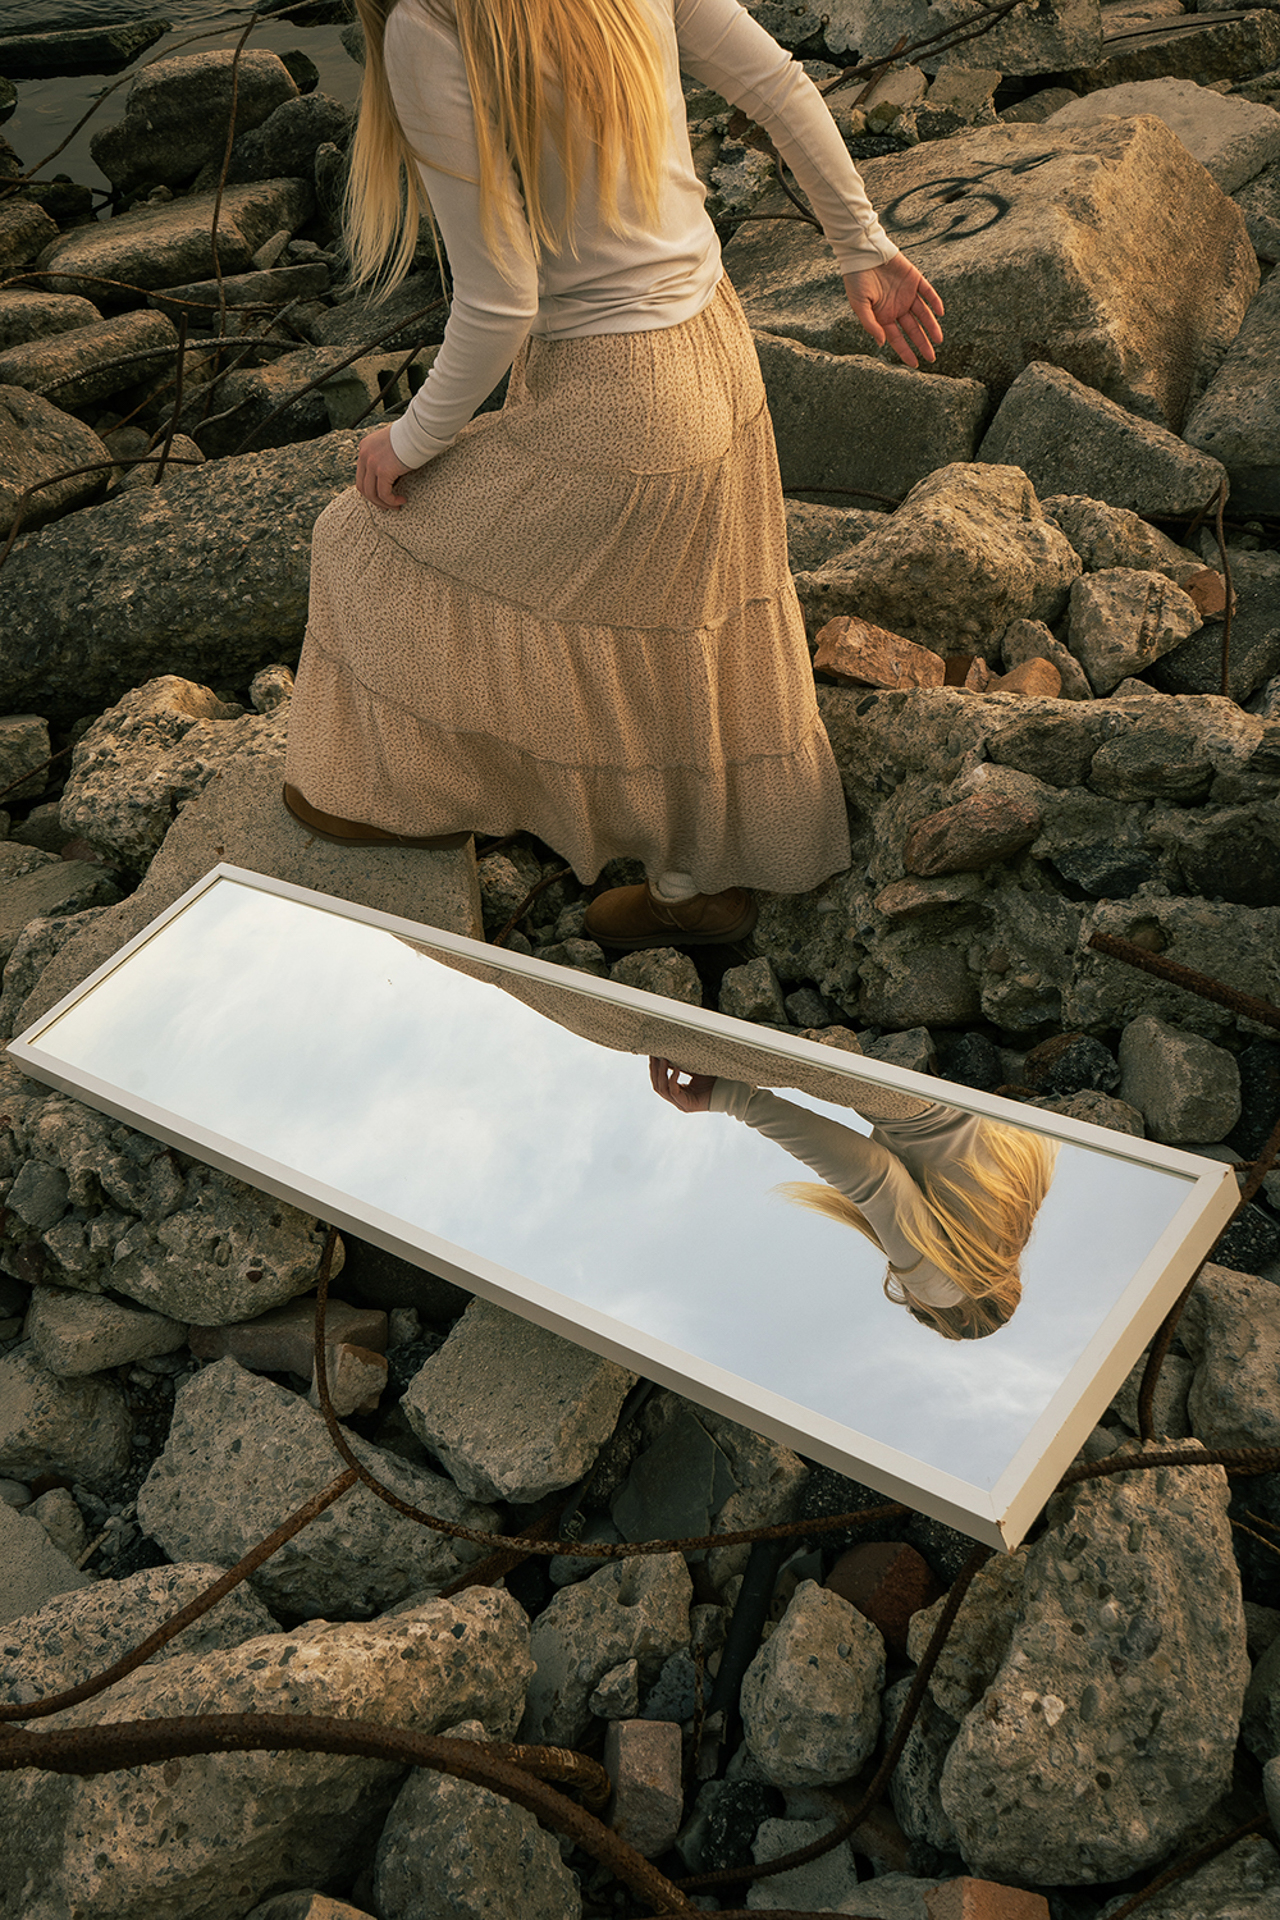 This photo consists of a mirror placed on the ground in a rock-field as a woman with blond hair walks along the rocks beside the mirror.